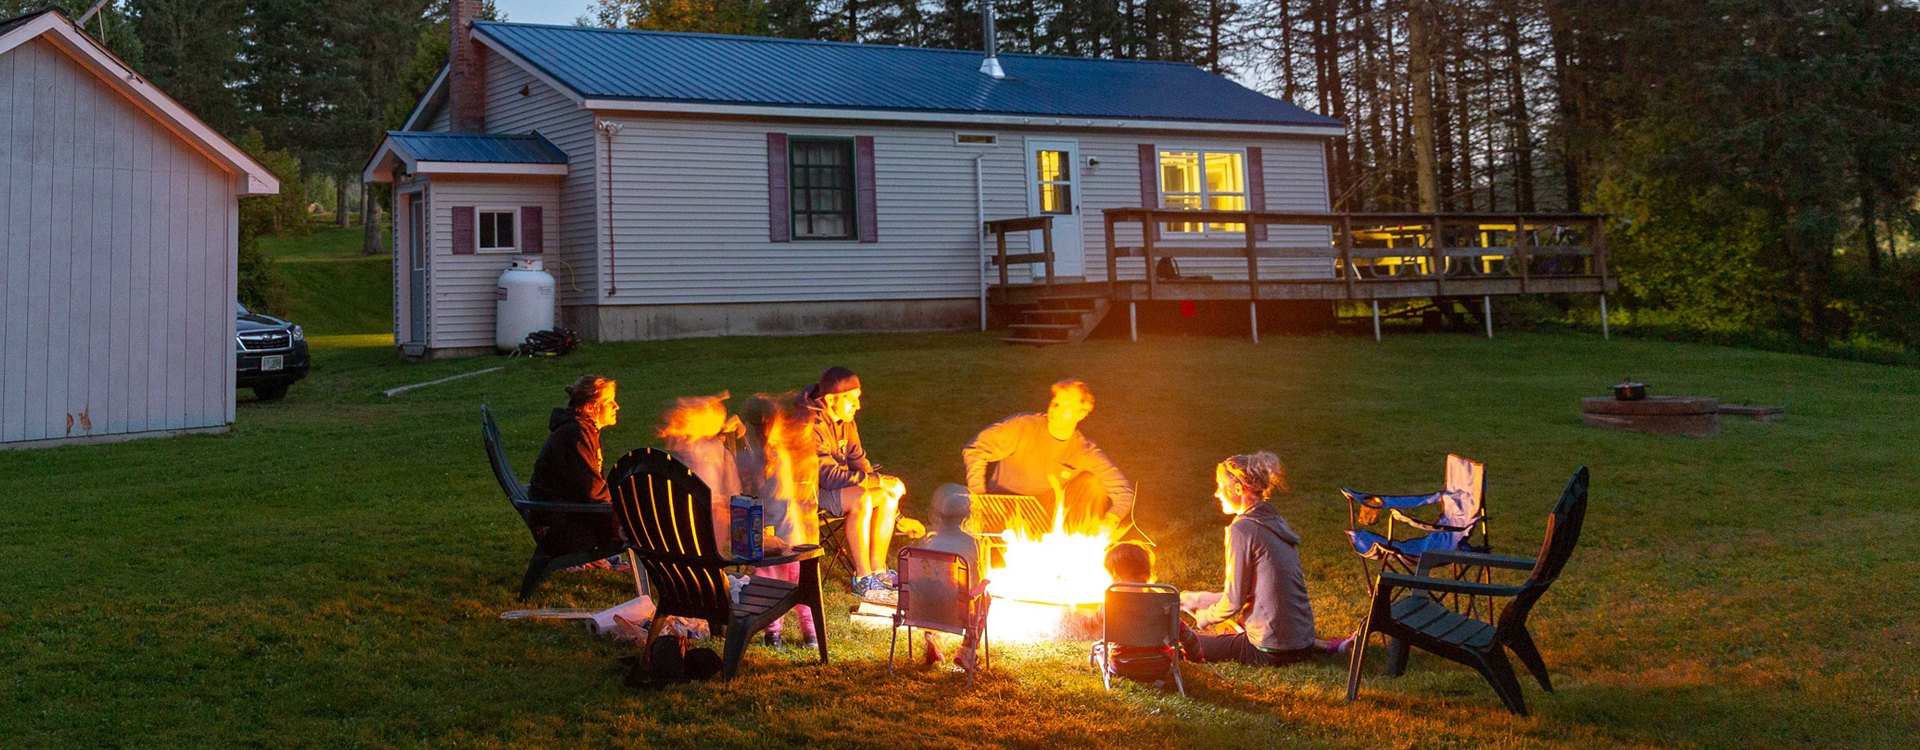 family around at campfire at coleman lodges